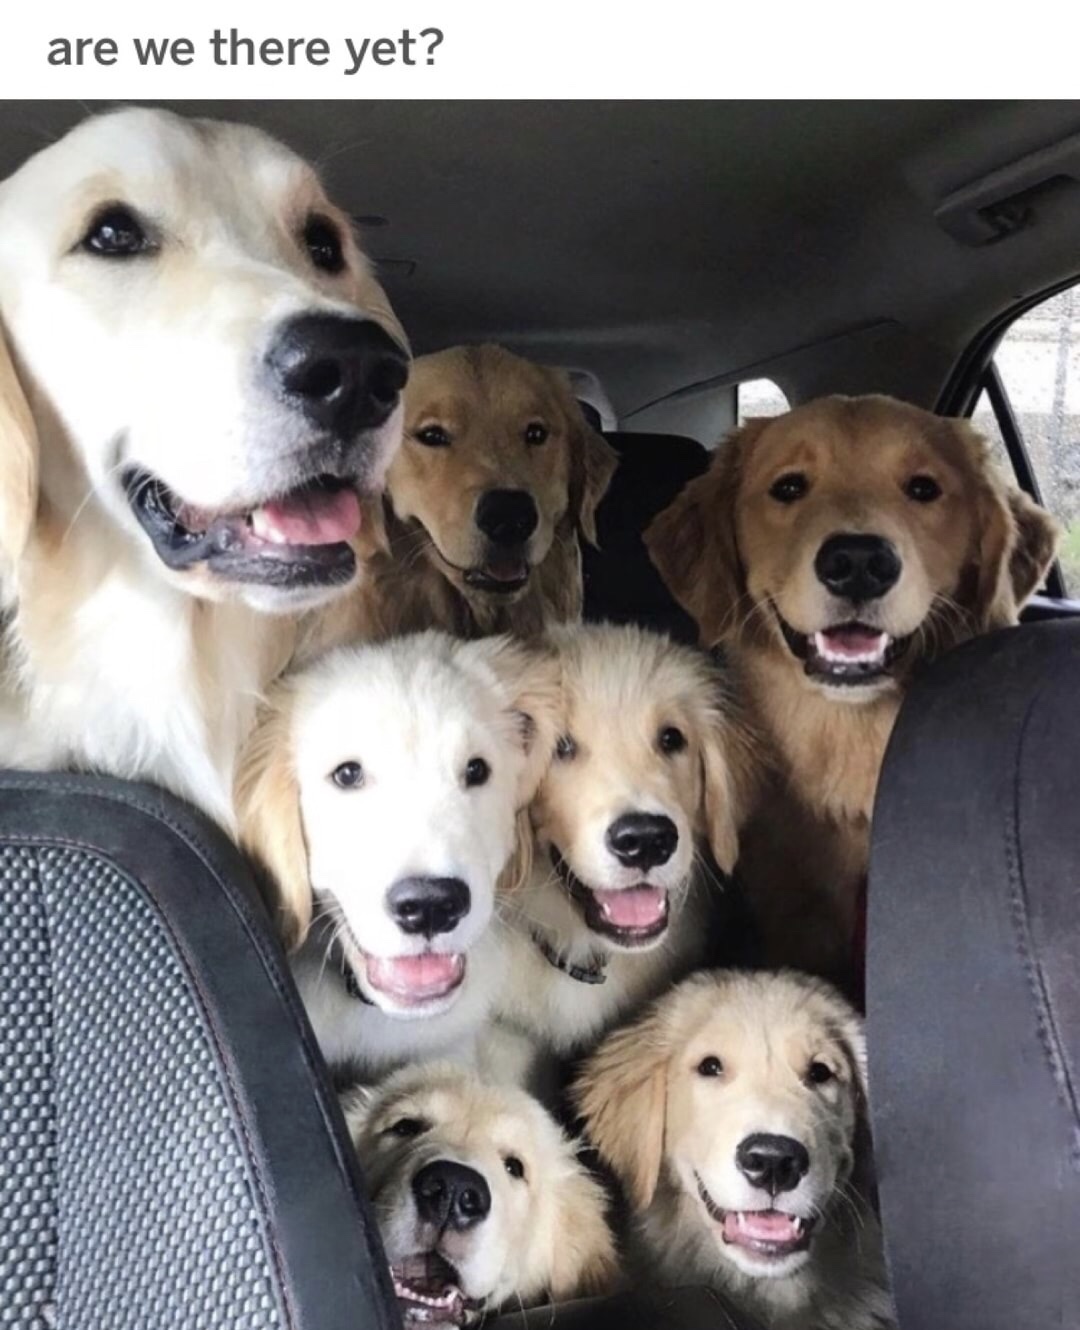 dog big family - are we there yet?